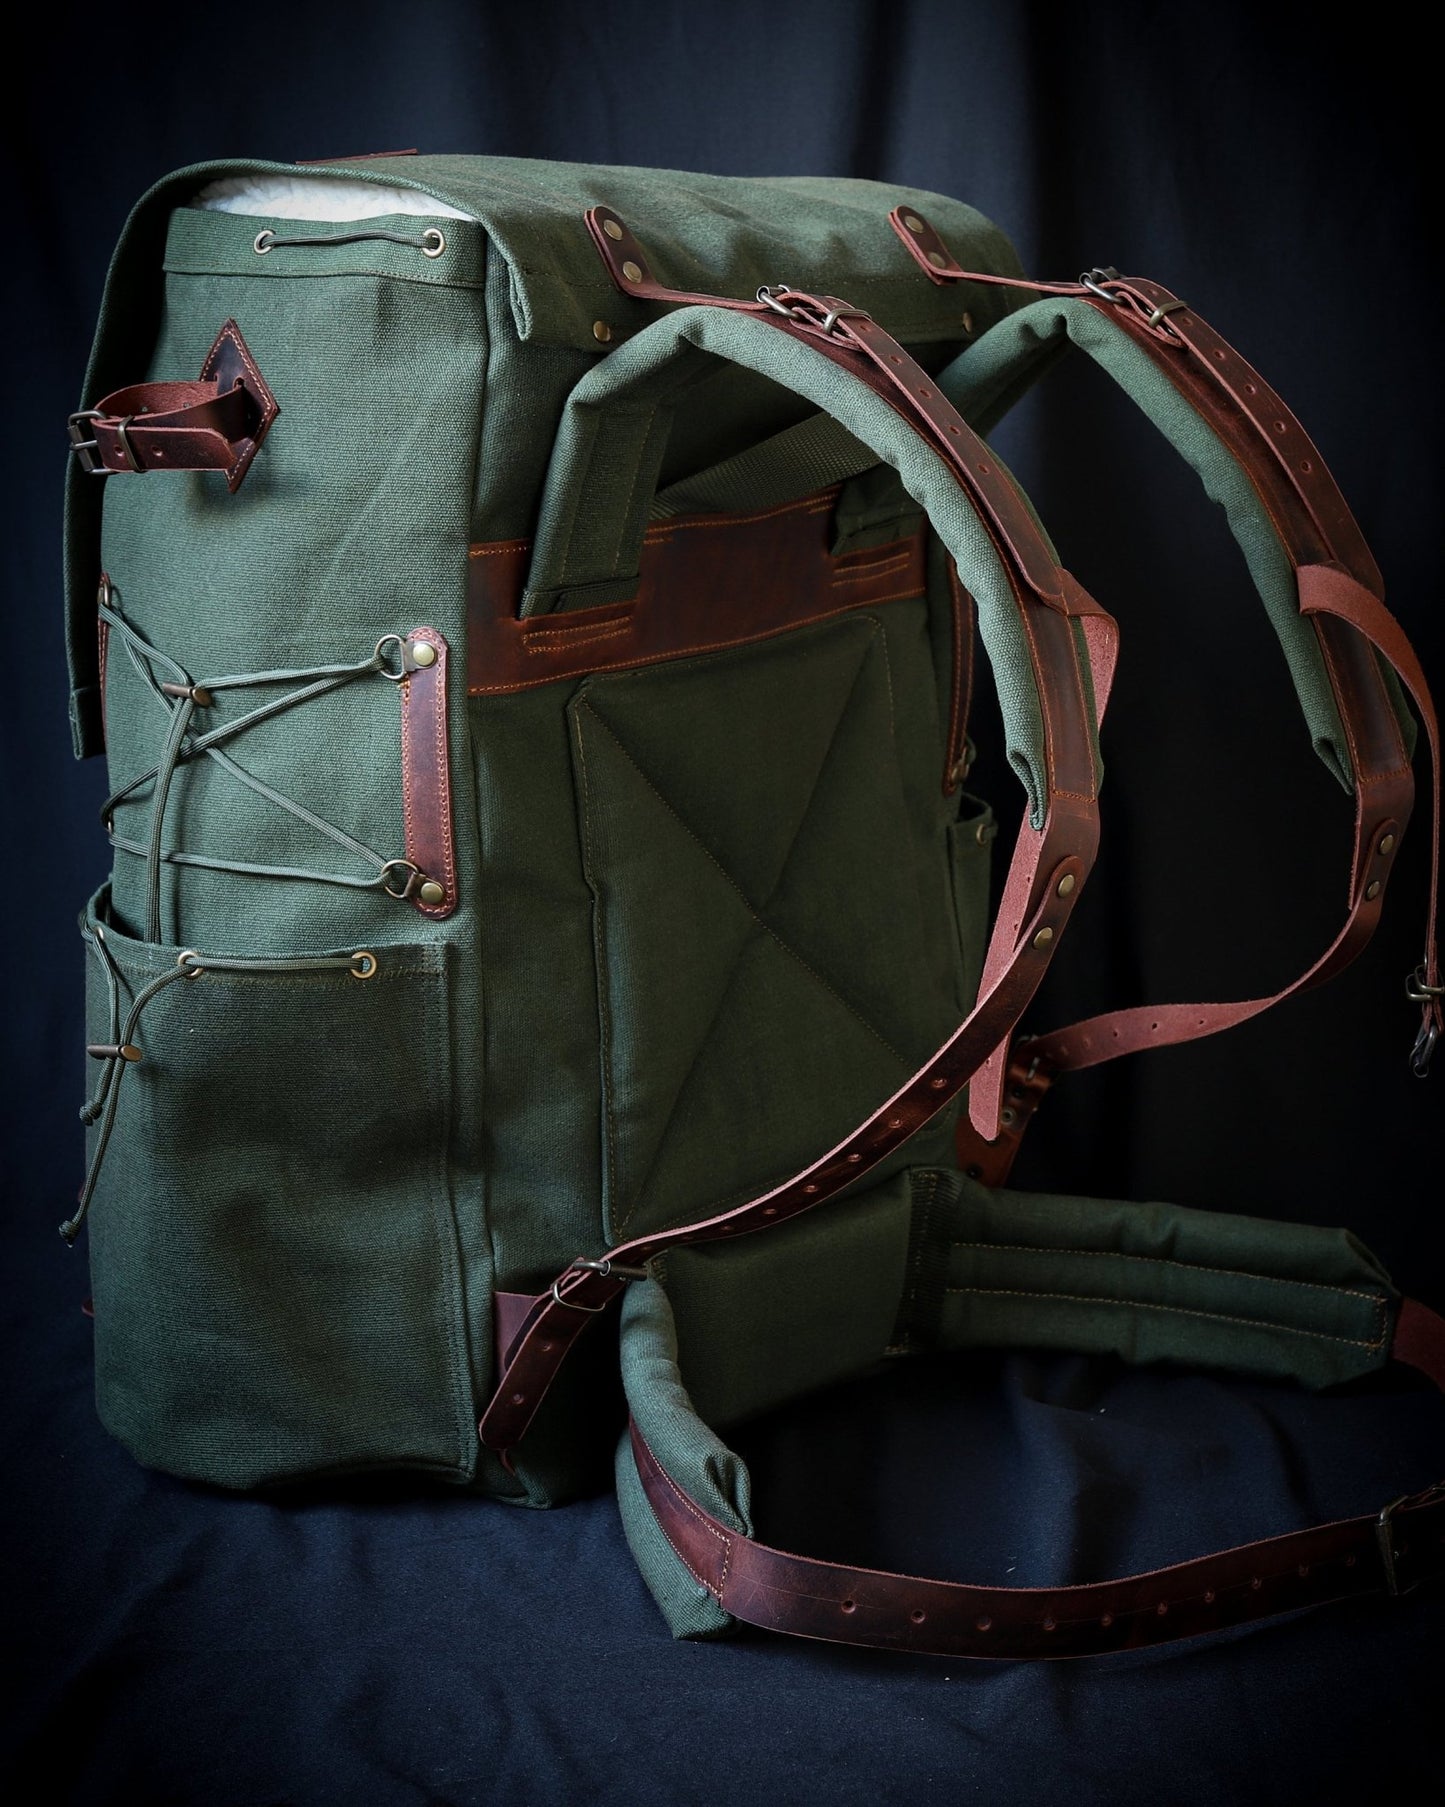 30 to 80 Liter Camping Backpack Handmade Leather and Waxed Canvas, Colors: Brown, Green, Black unlimited personalization  99percenthandmade Khaki Green 30 Liters 